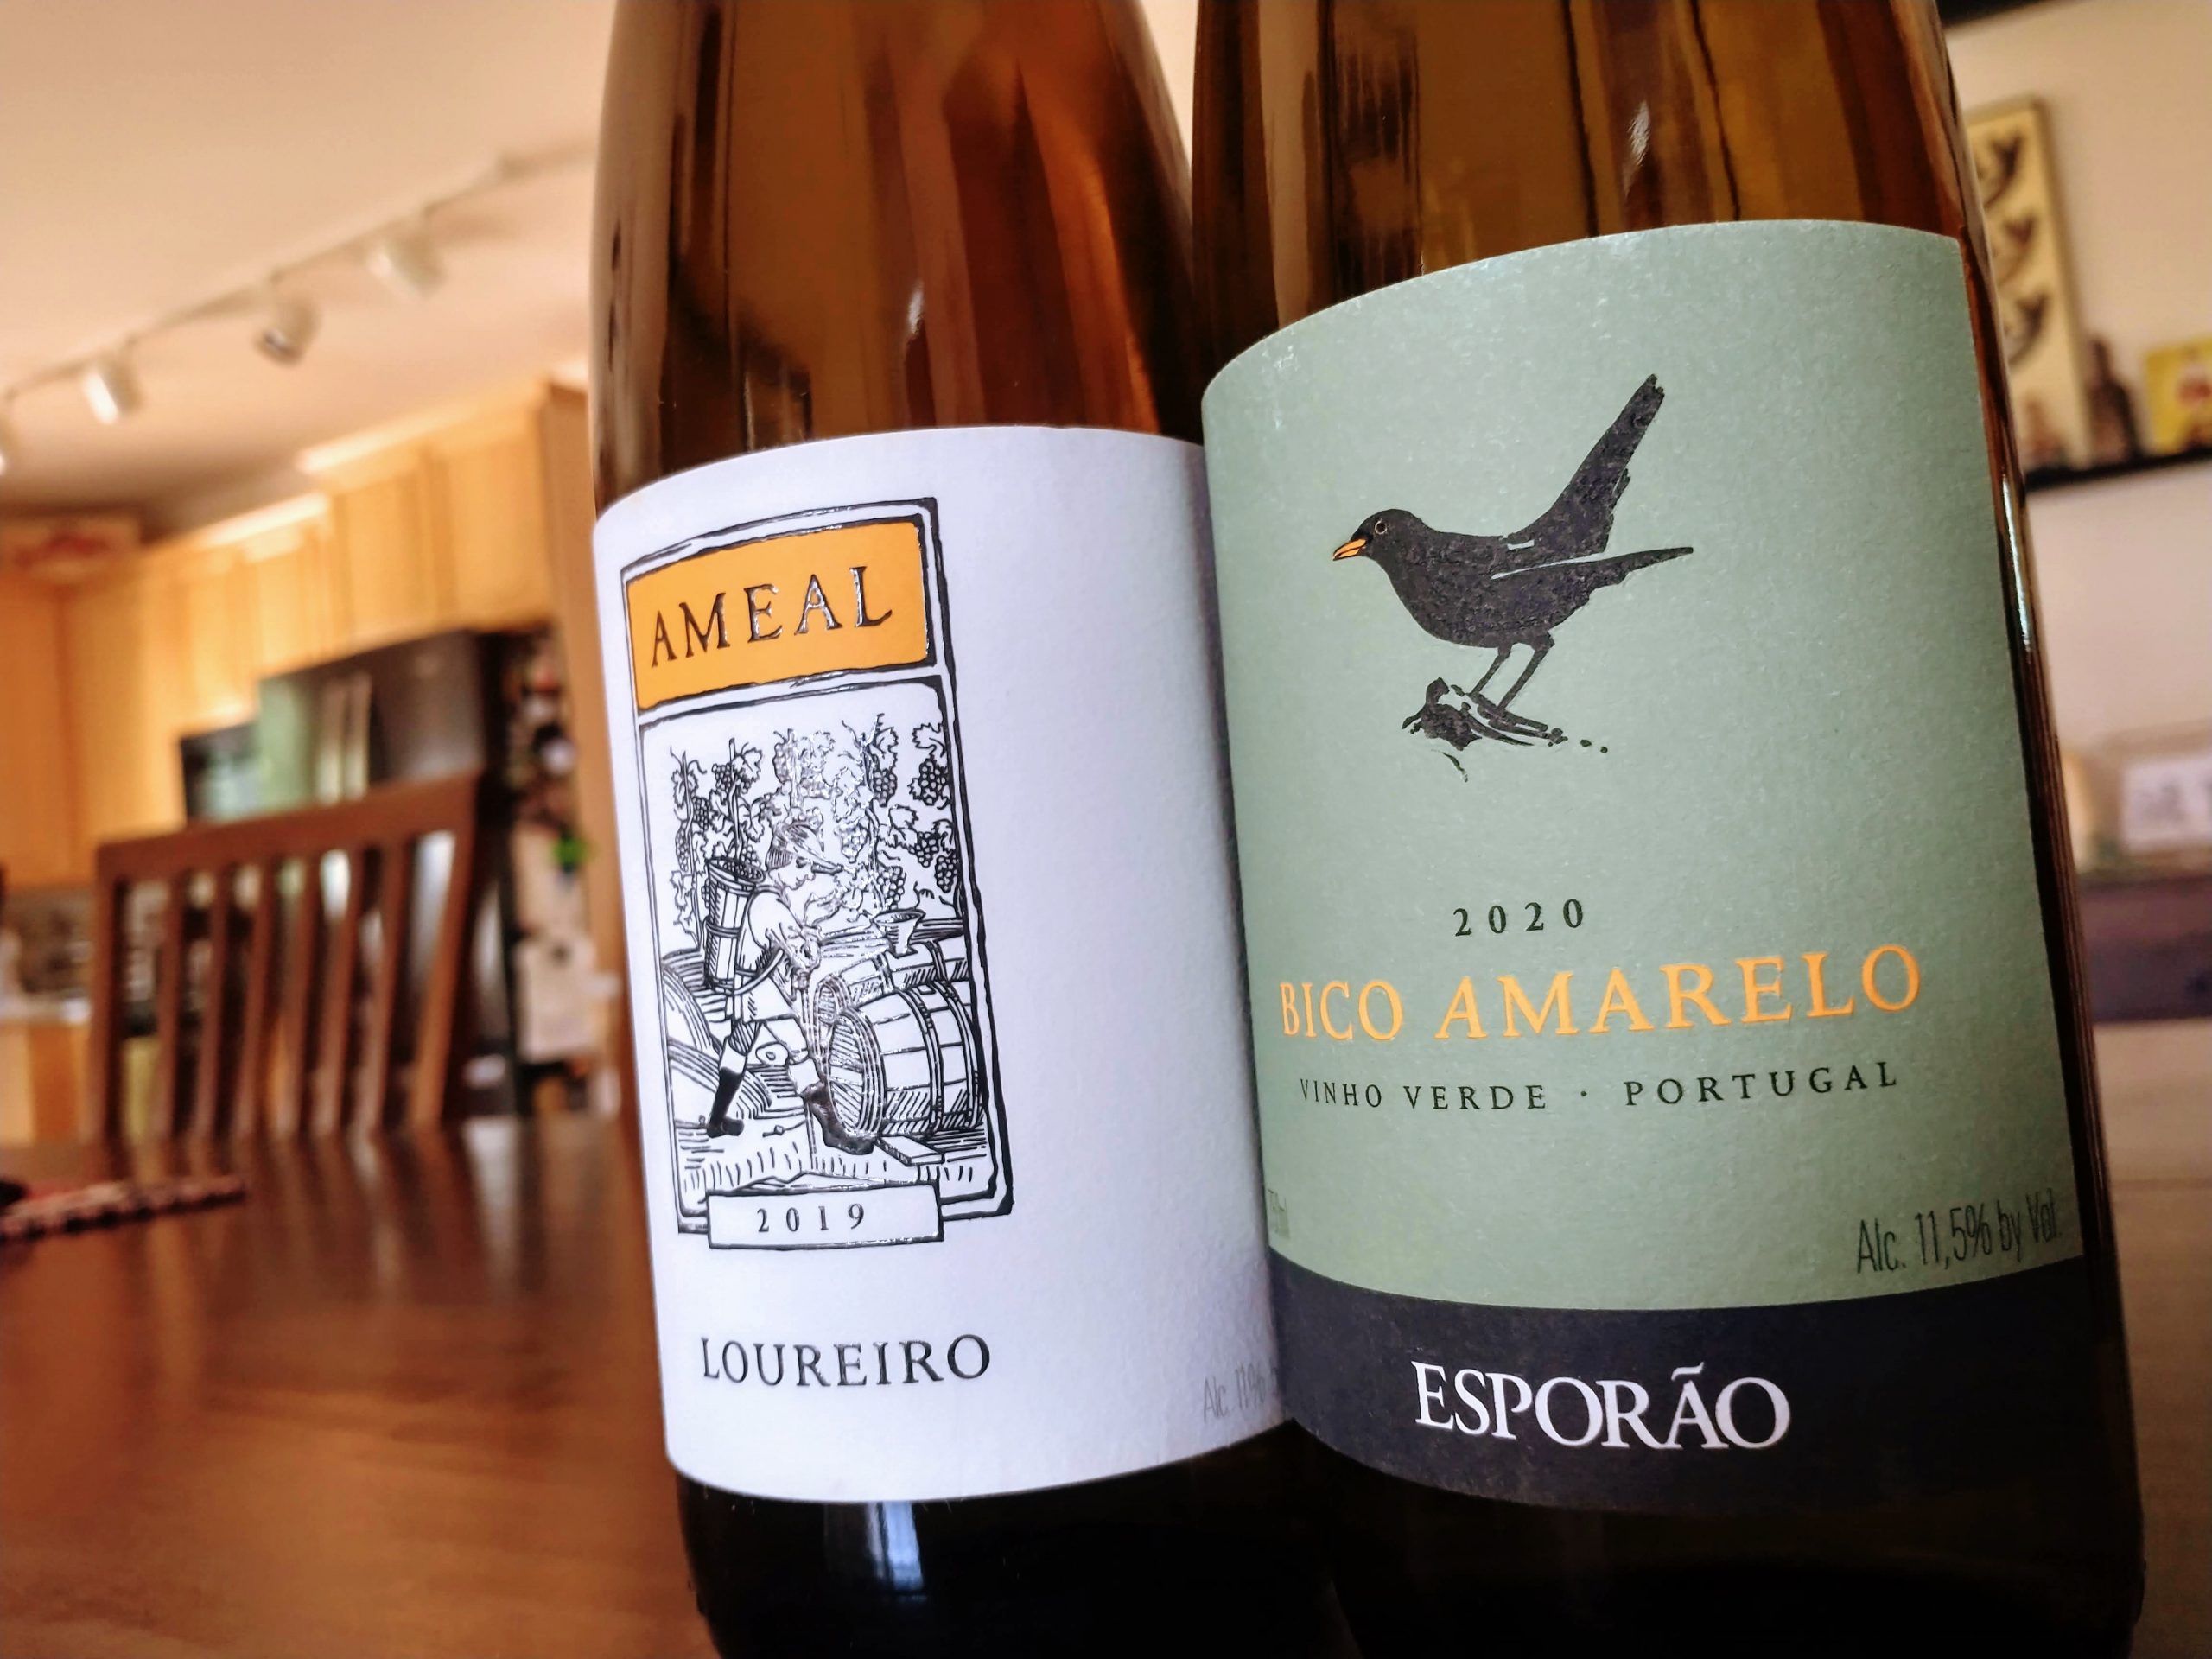 Ameal wines Portugal